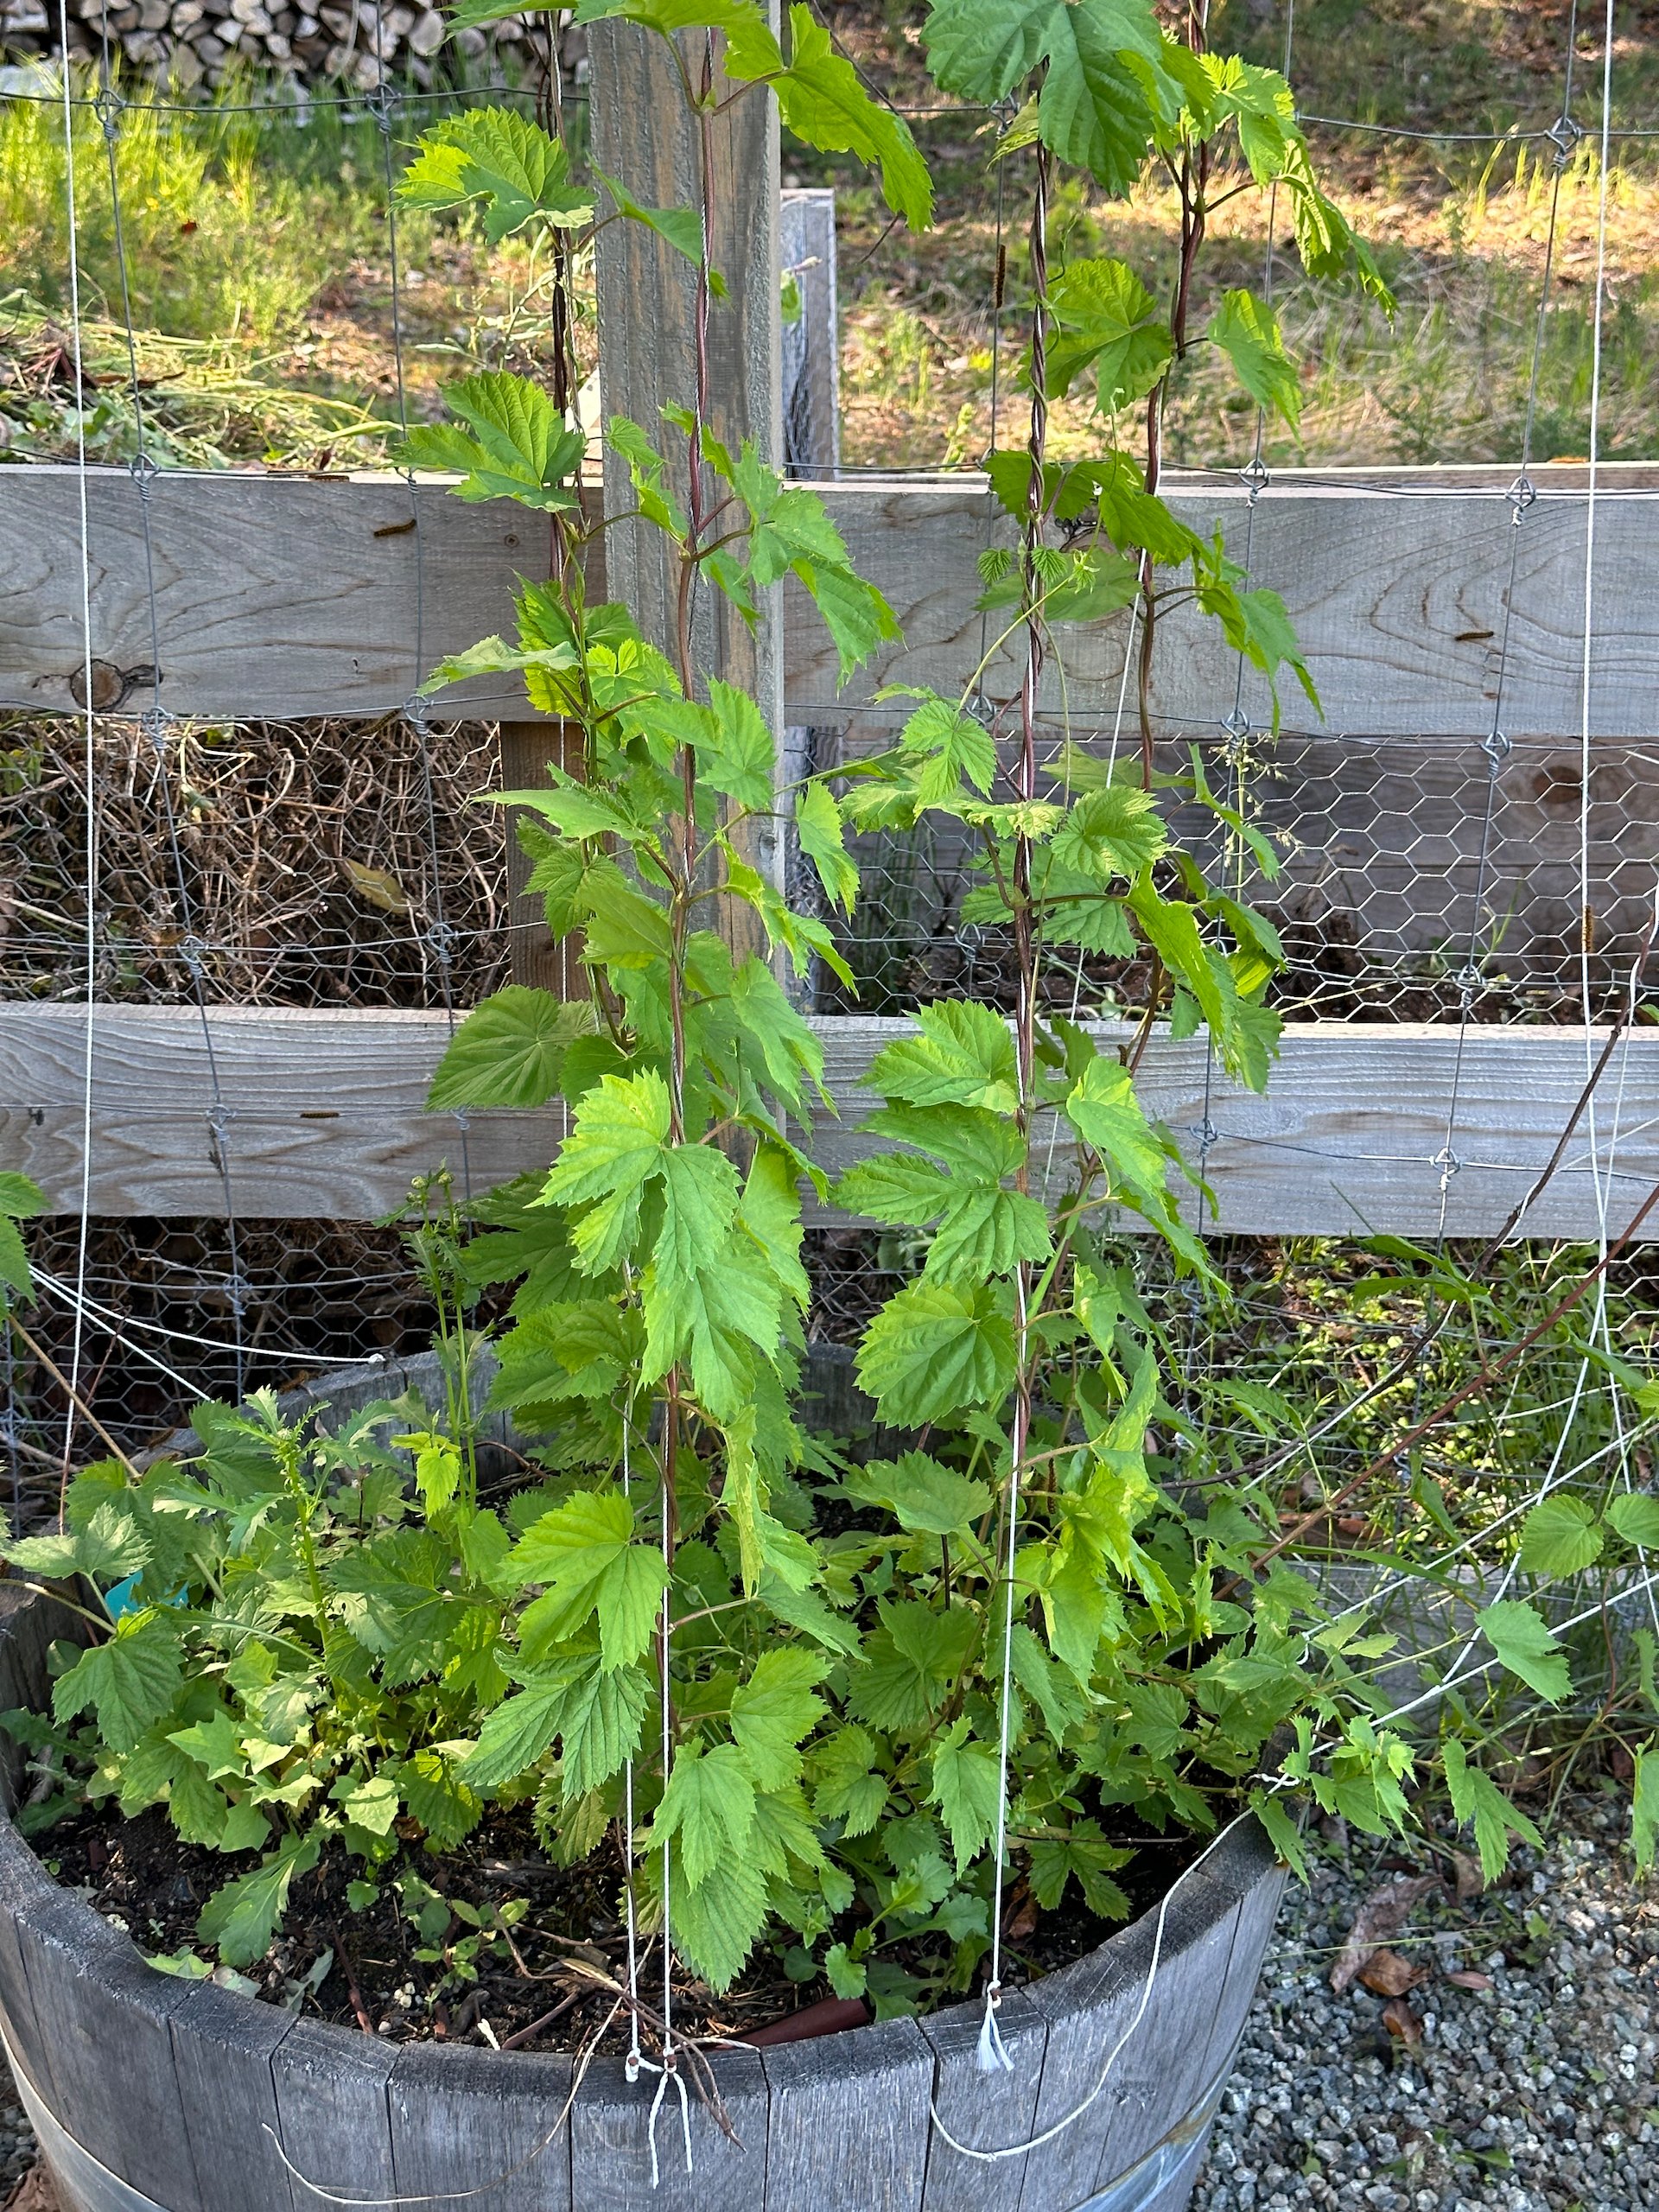  My hops are off to a strong start.  